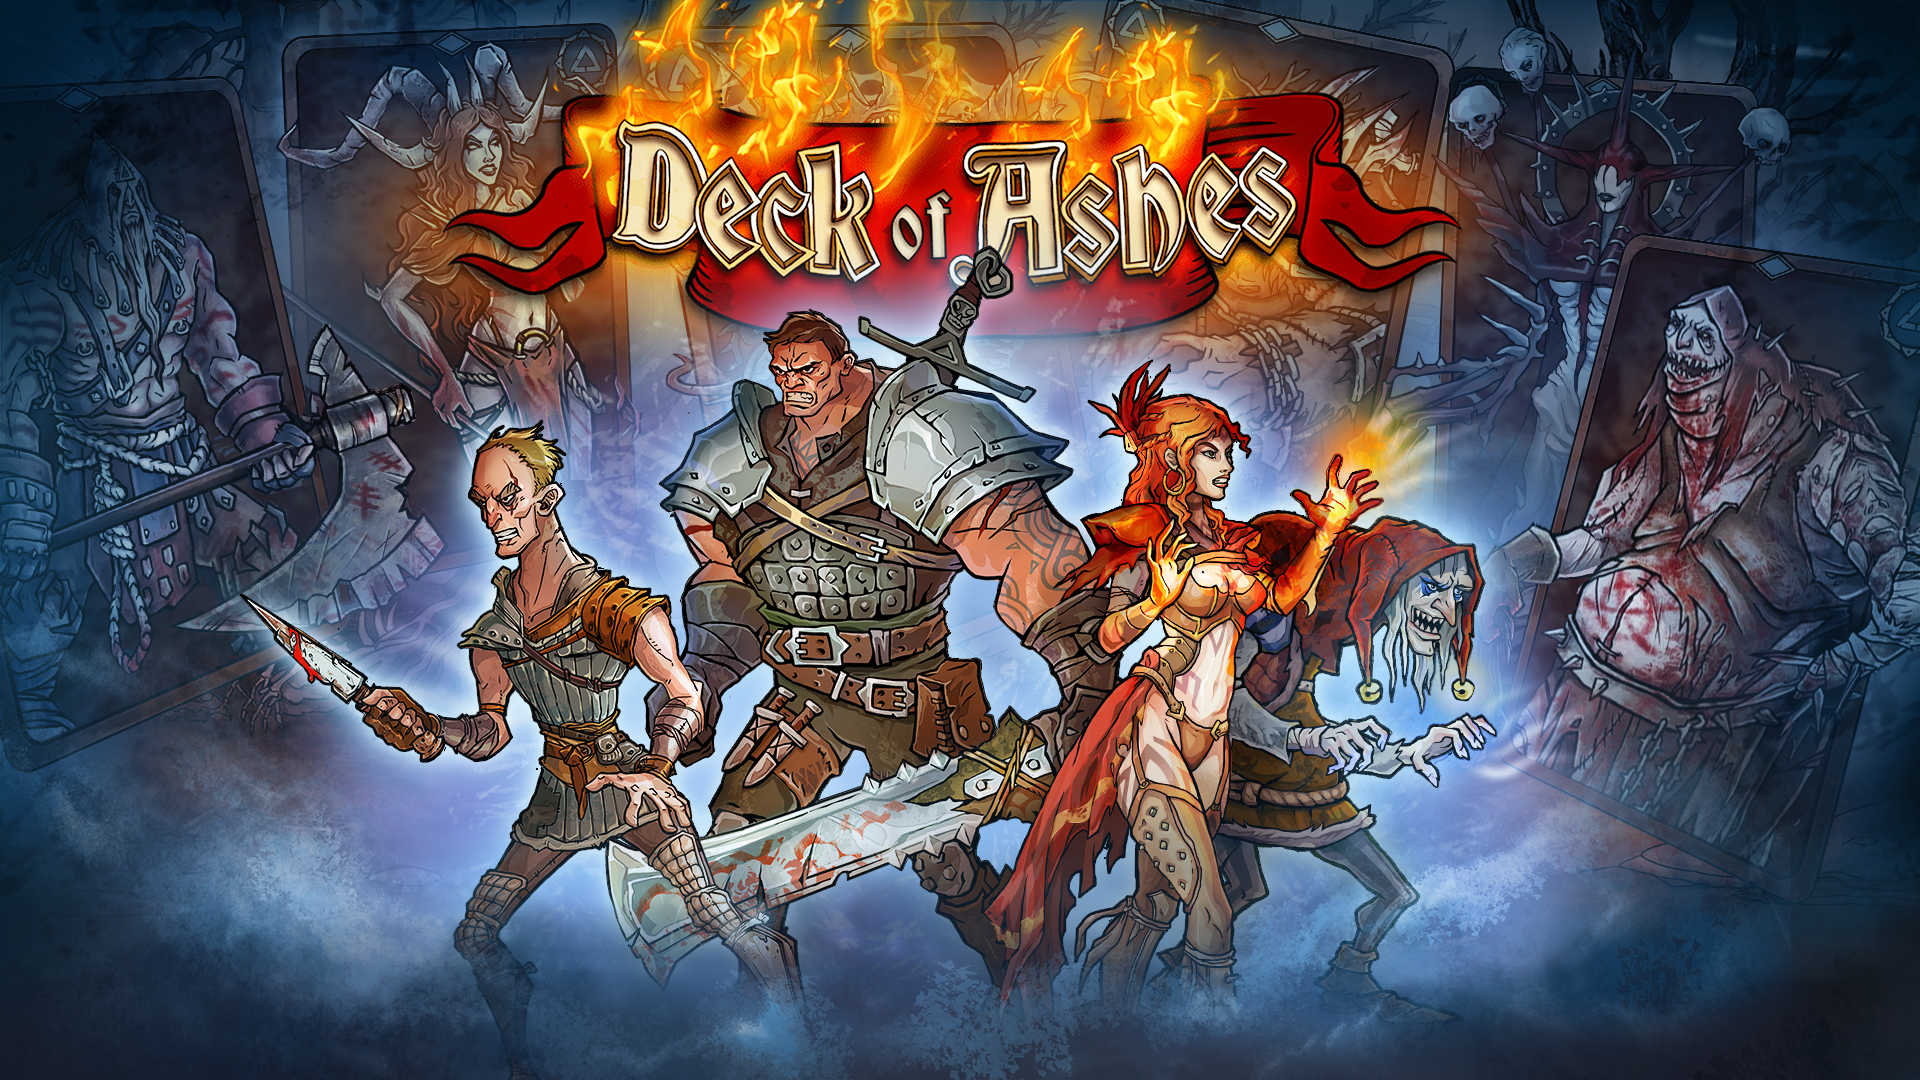 Hawked no pc | multiplayer | deck of ashes: jogo chegará aos pc's | 1ea258f0 image | multiplayer